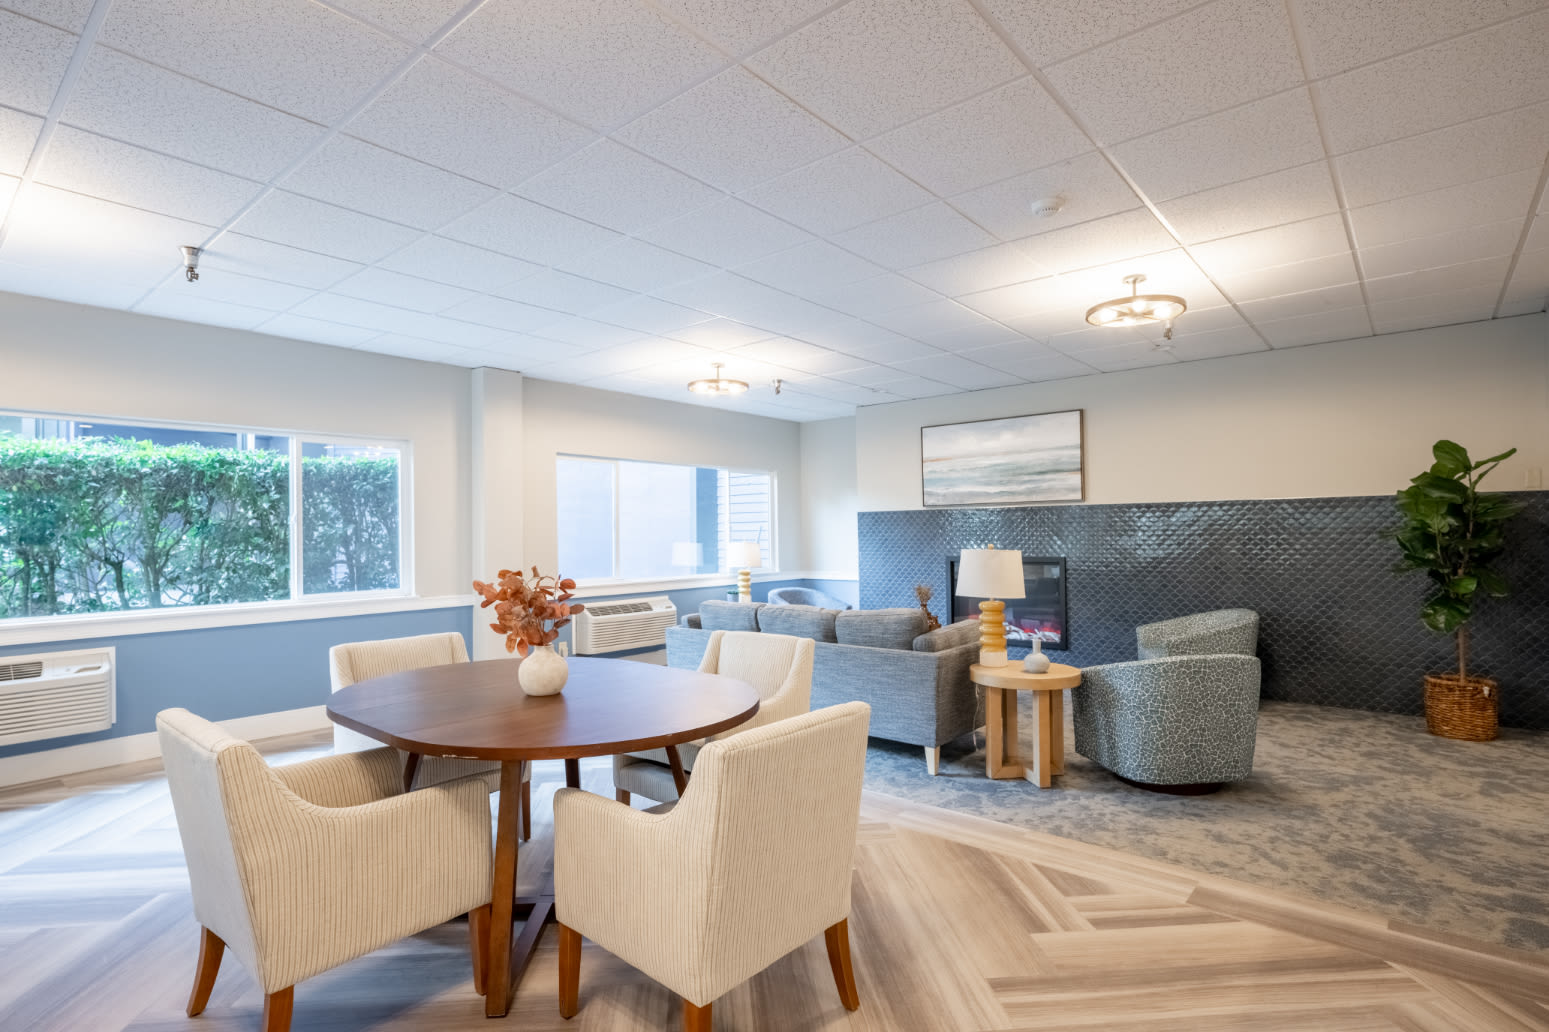 A luxurious living room at The Village Senior Living in Tacoma, Washington